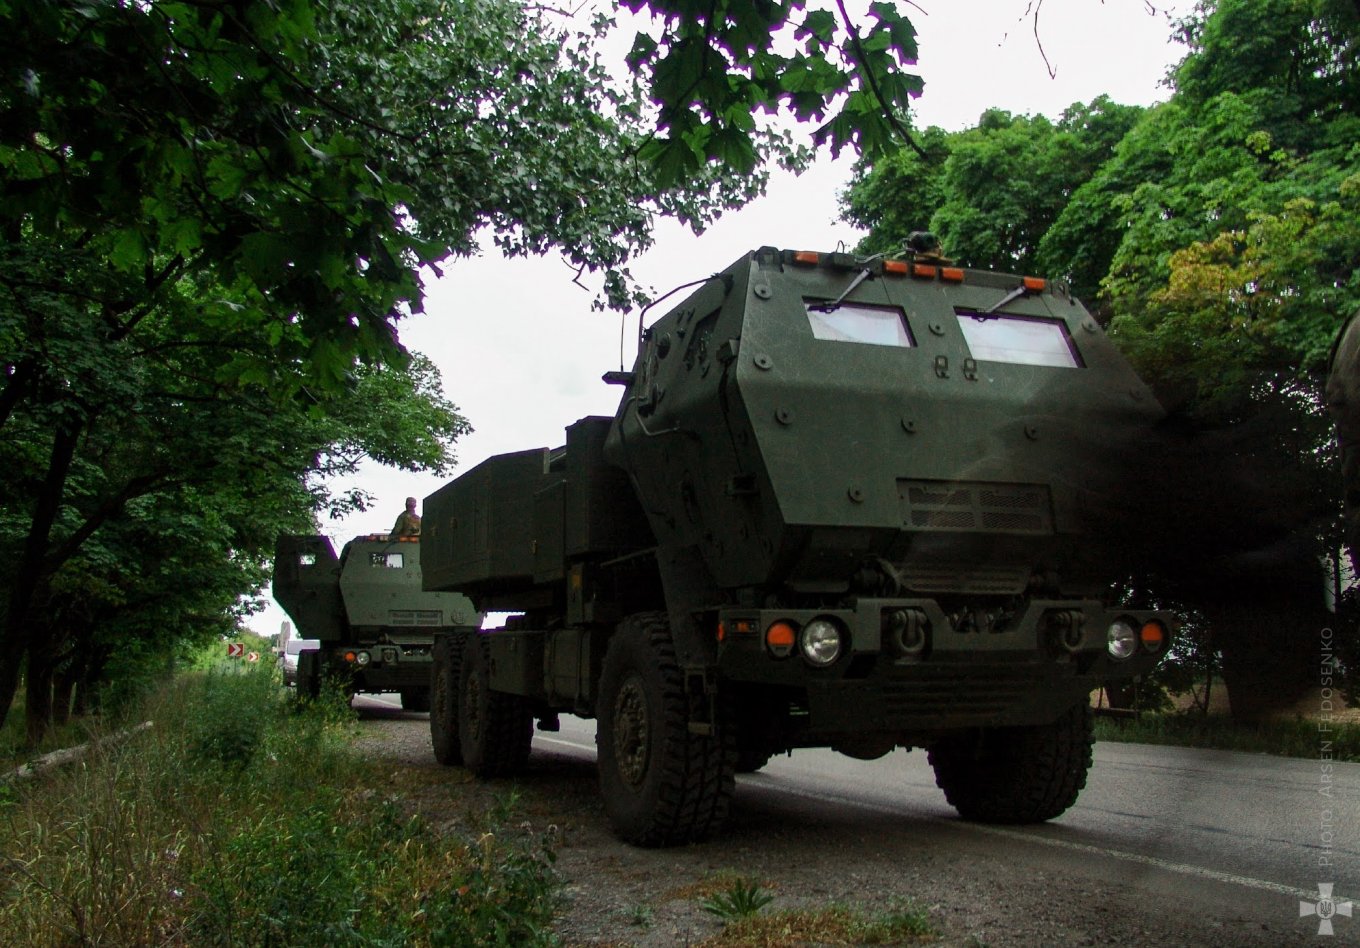 russia lives in a world where it has destroyed dozens of HIMARS systems in Ukraine, according to their official reports